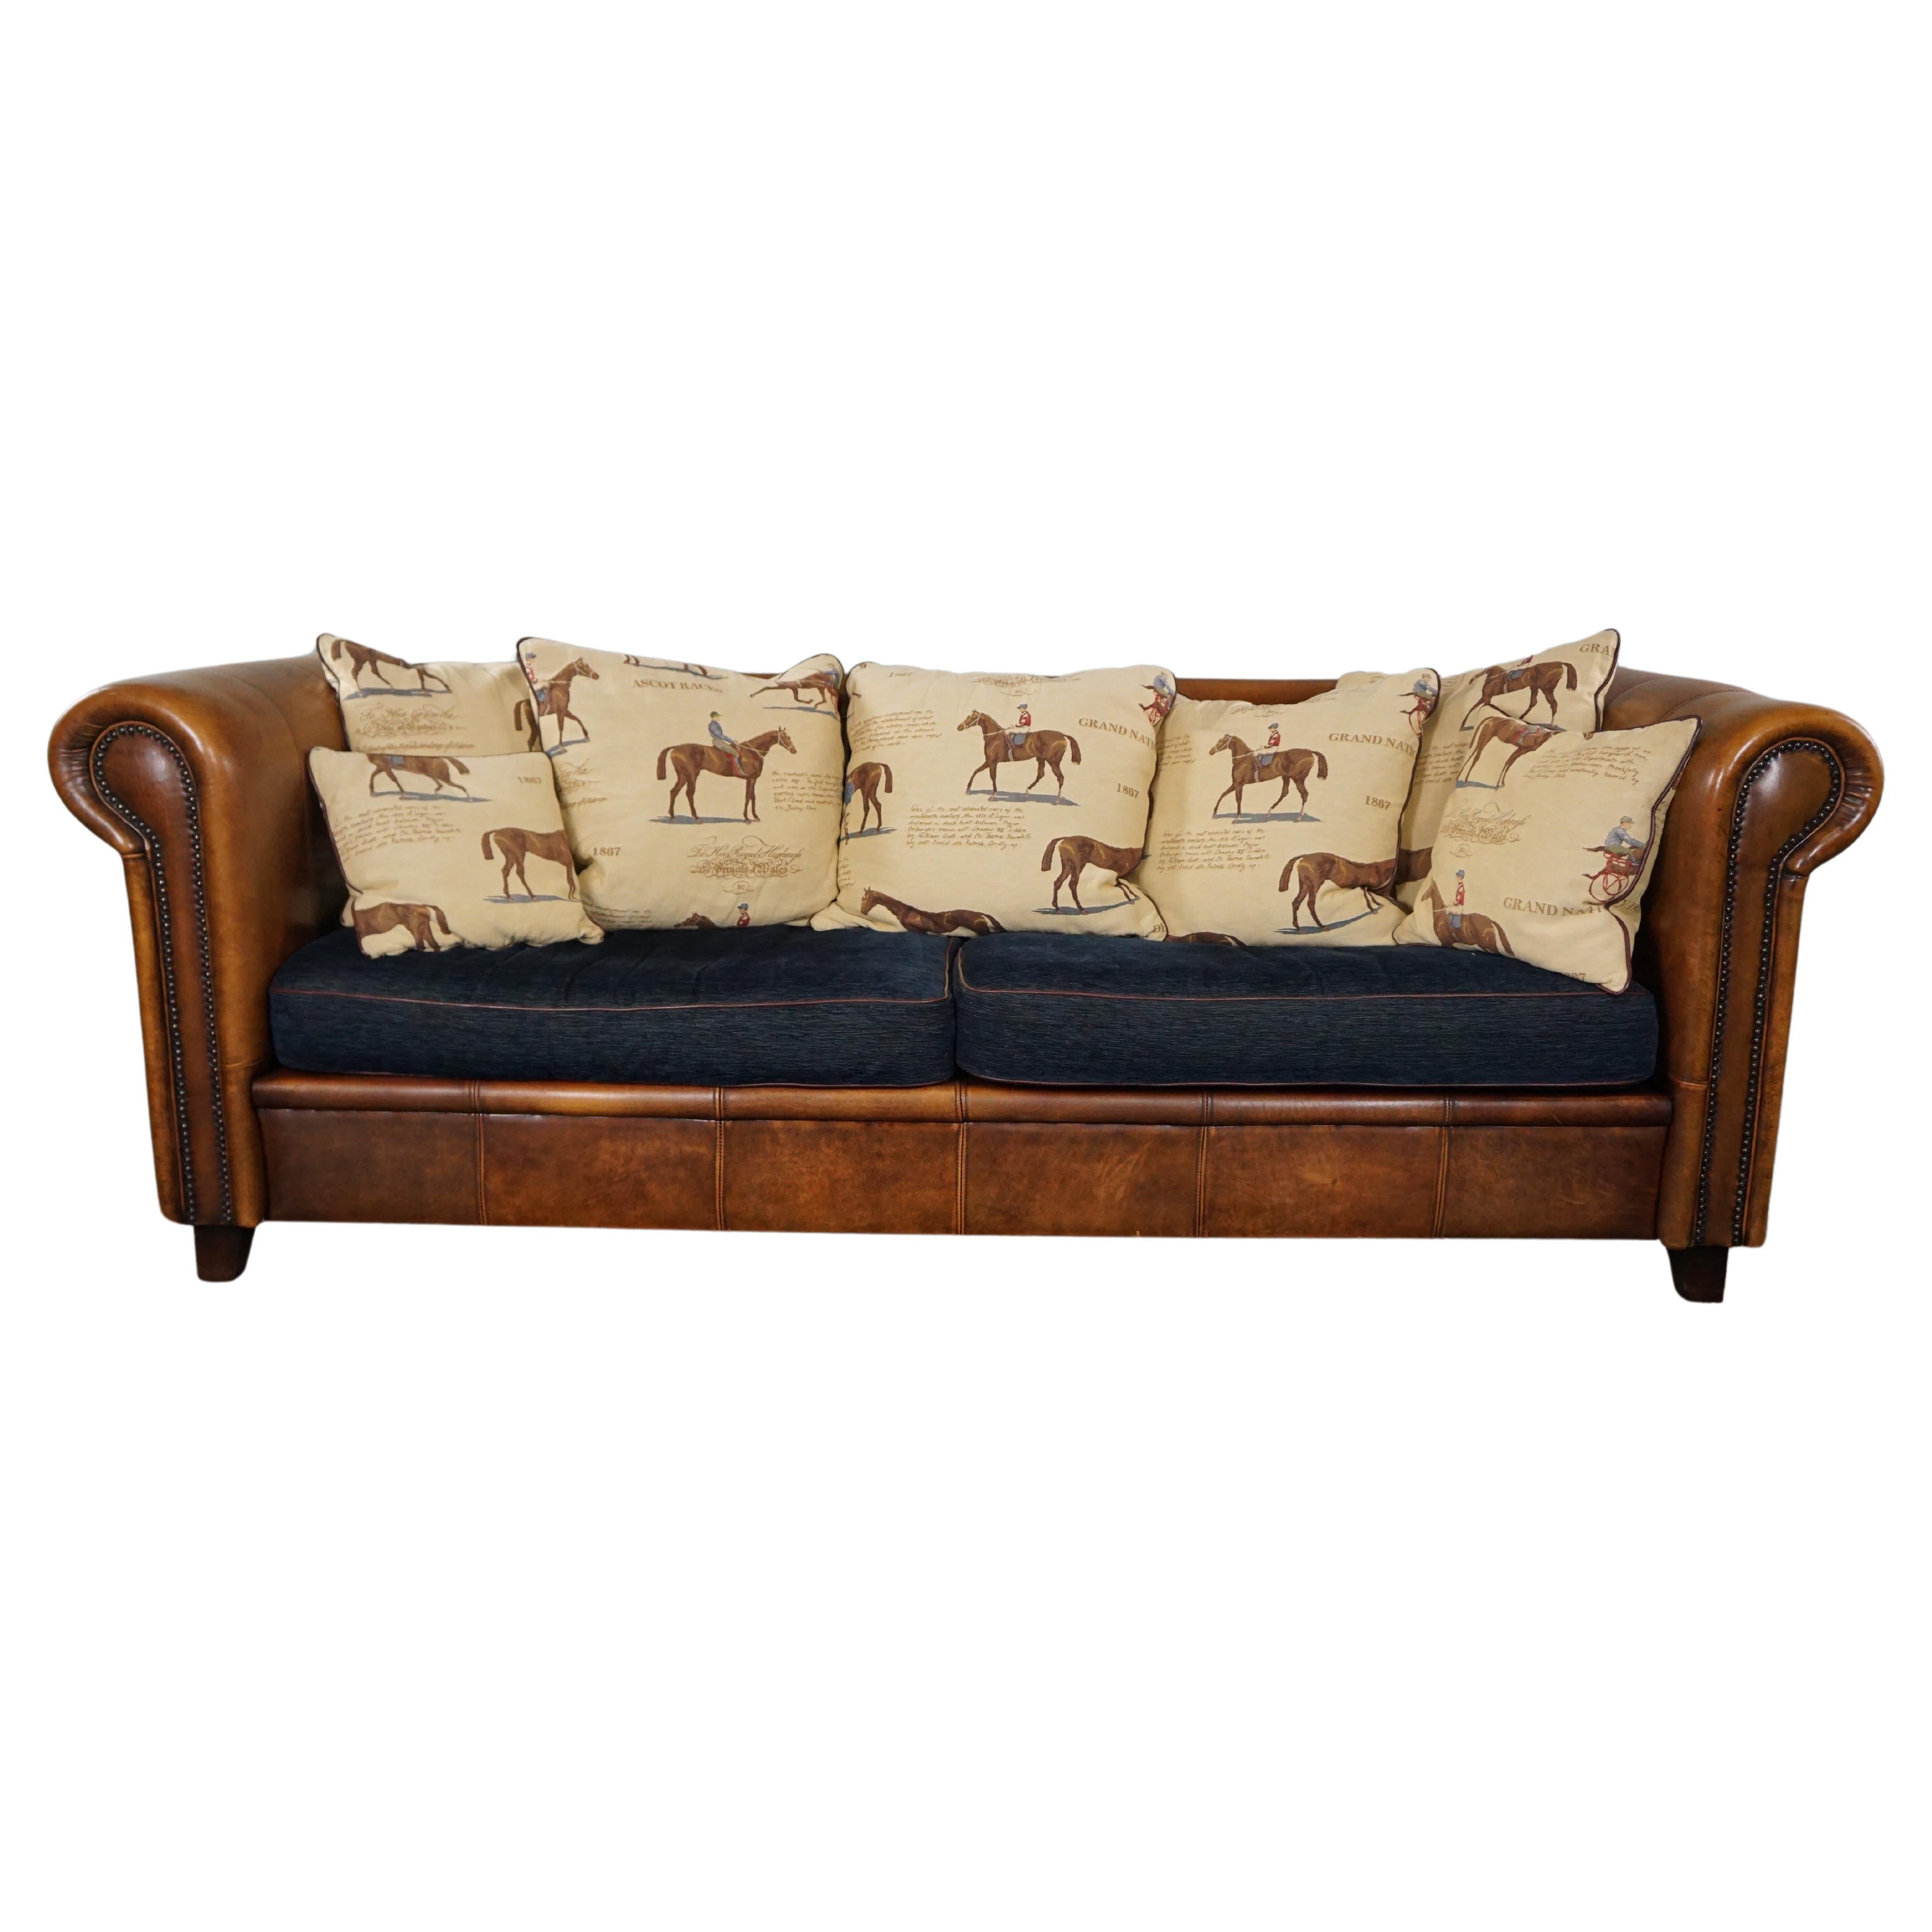 Sheep leather 3-seater sofa with fabric cushions featuring a horse motif